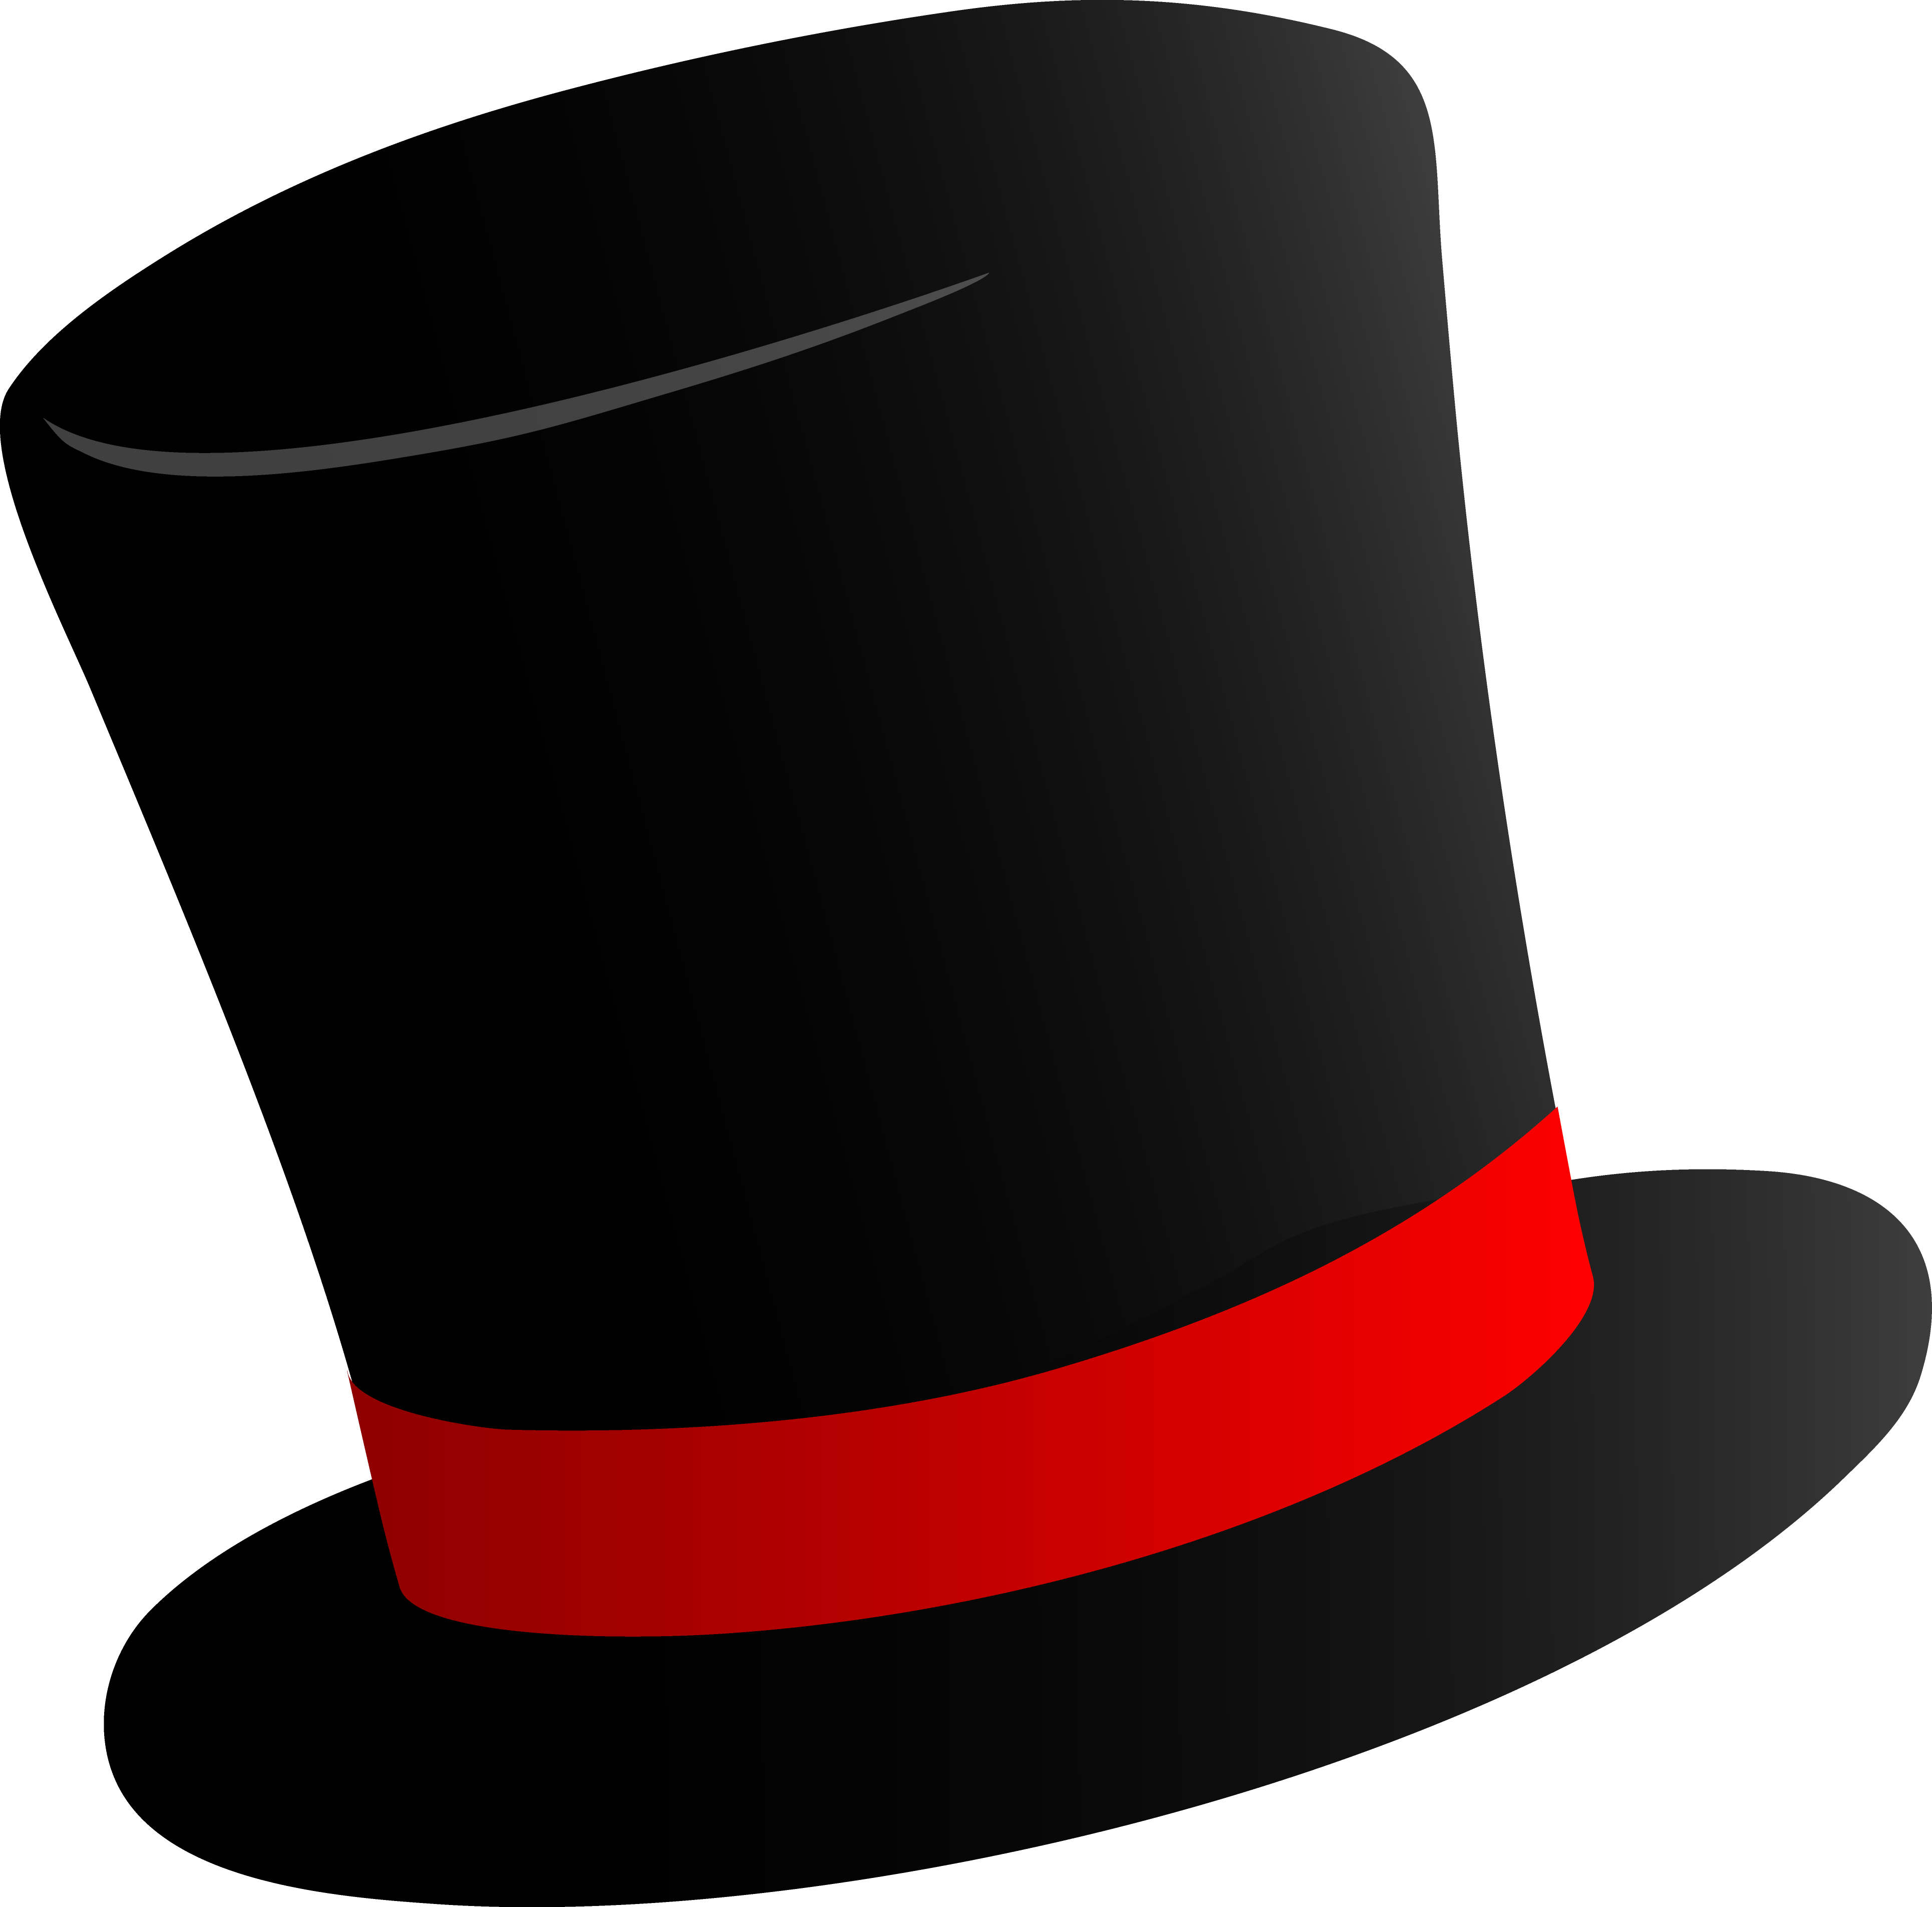 Funny hat get any. Words clipart homecoming